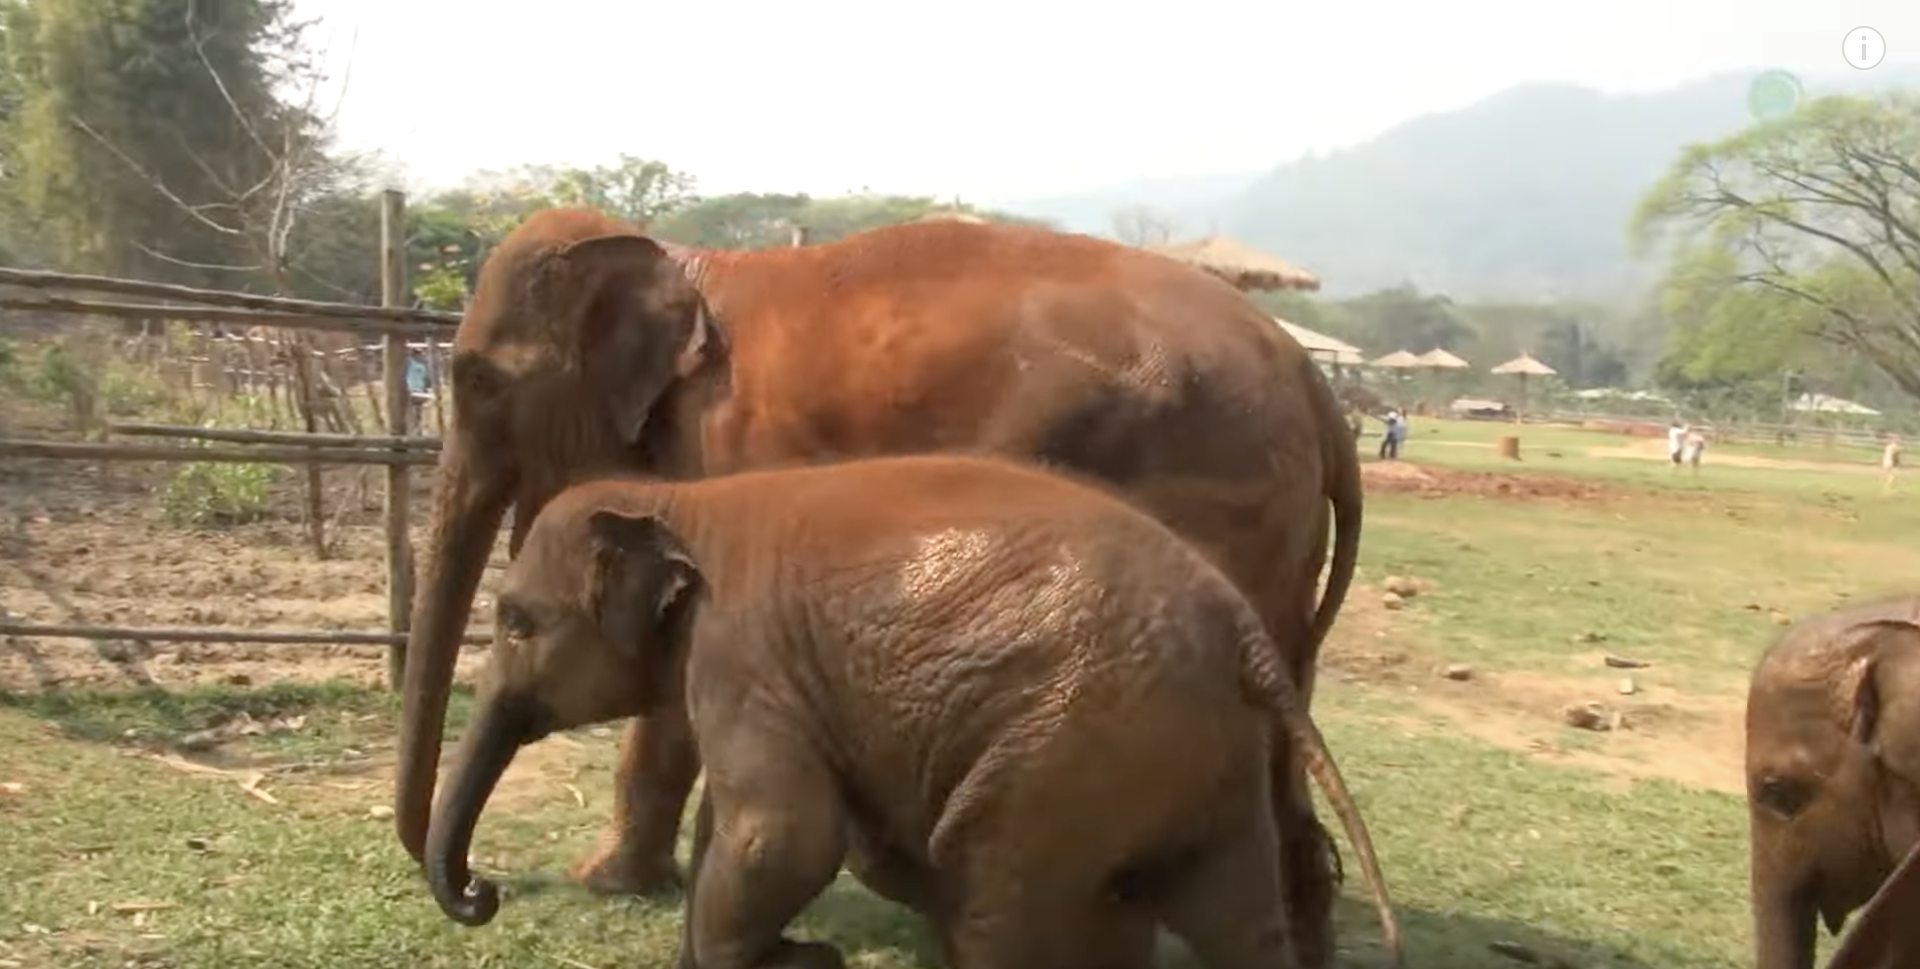 Baby Elephants enjoy cooling off in the water tank